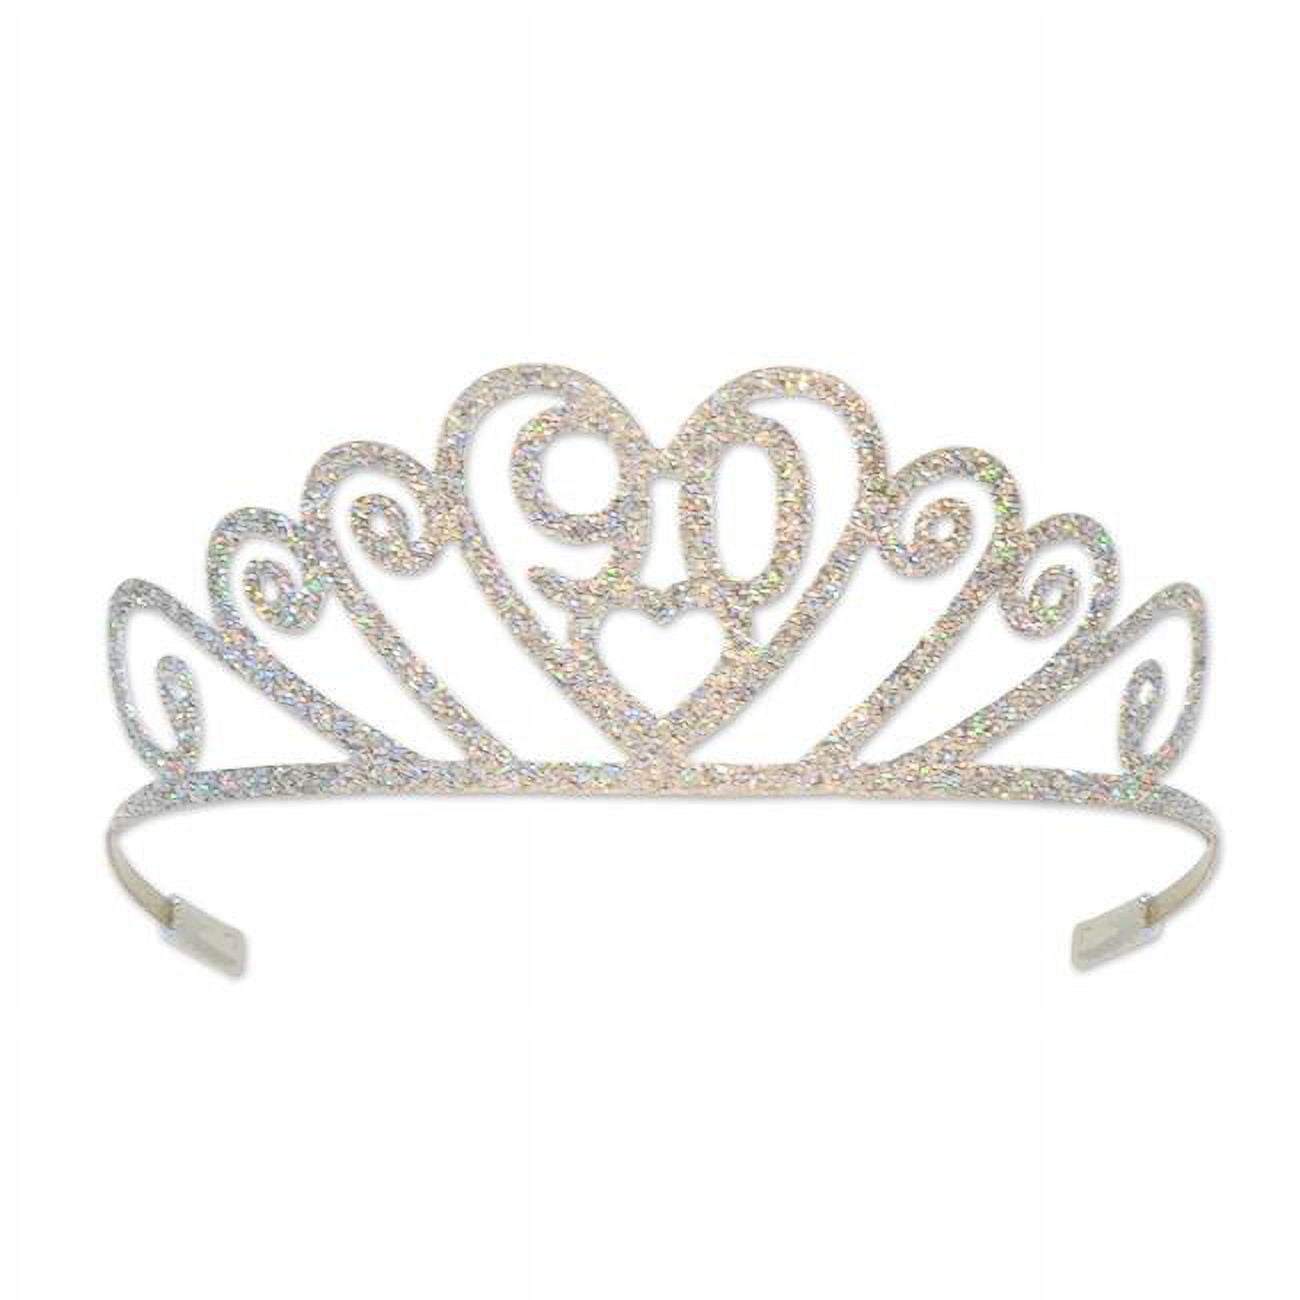 Picture of Beistle 60633-90 Glittered Metal 90 Tiara, White - Pack of 6